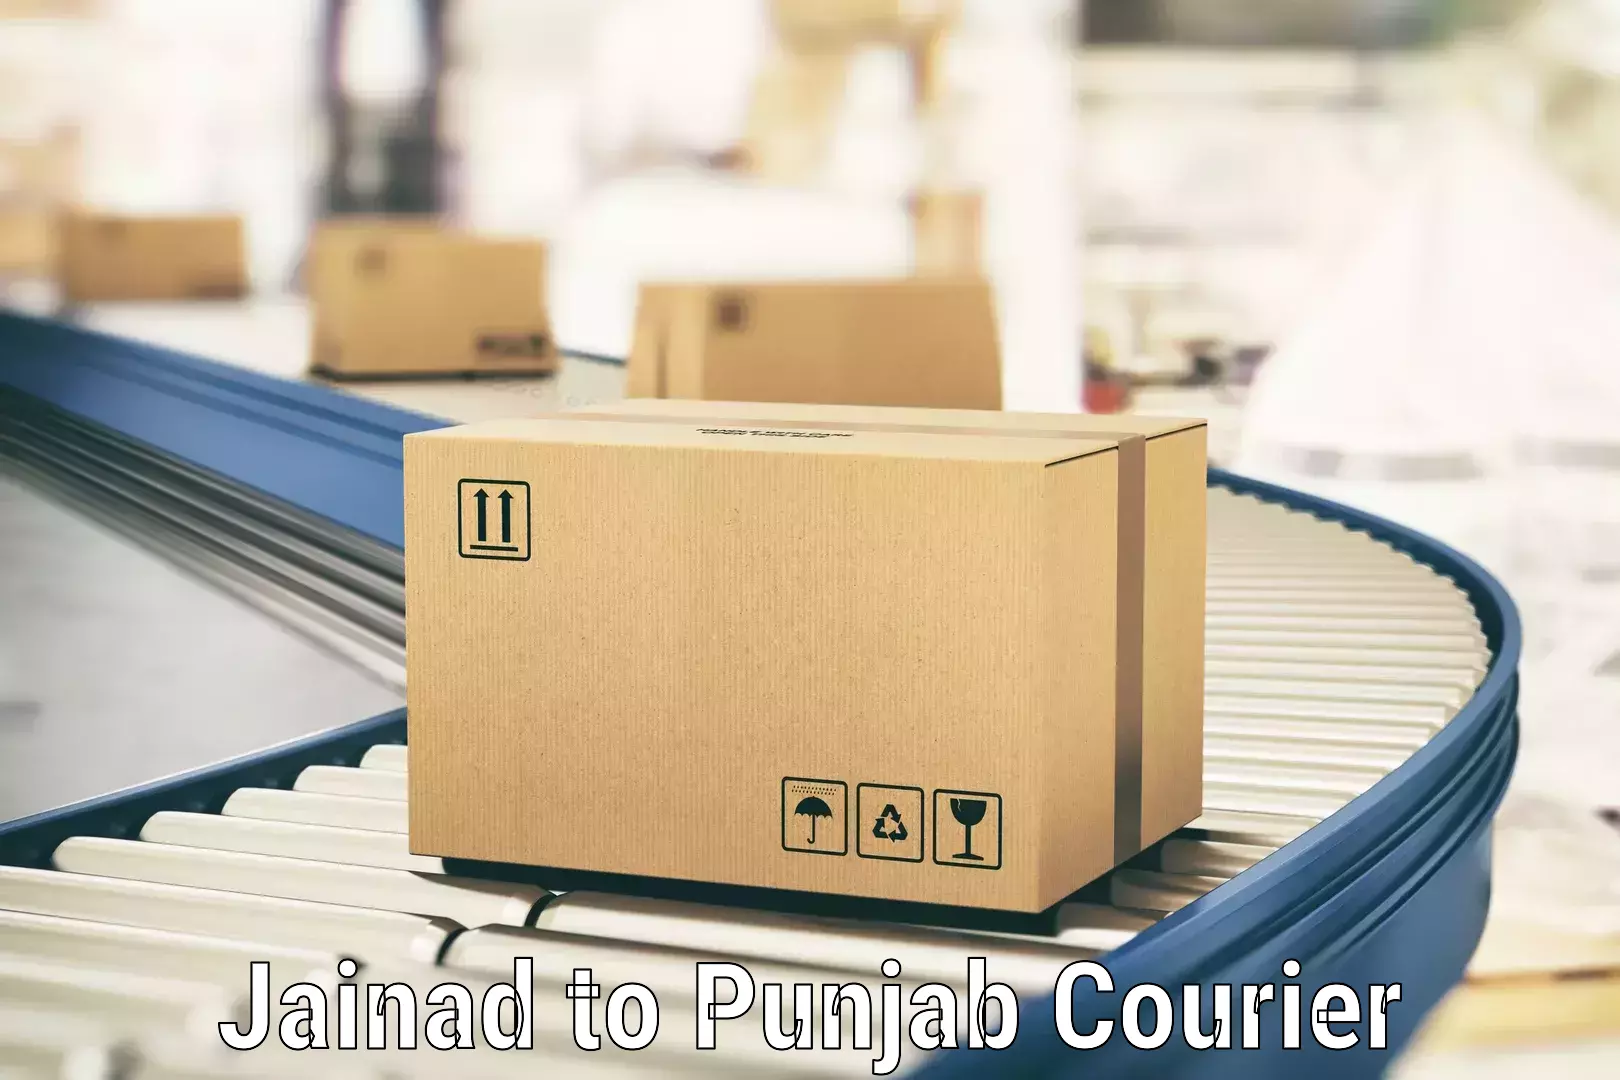 Cost-effective courier solutions Jainad to Anandpur Sahib